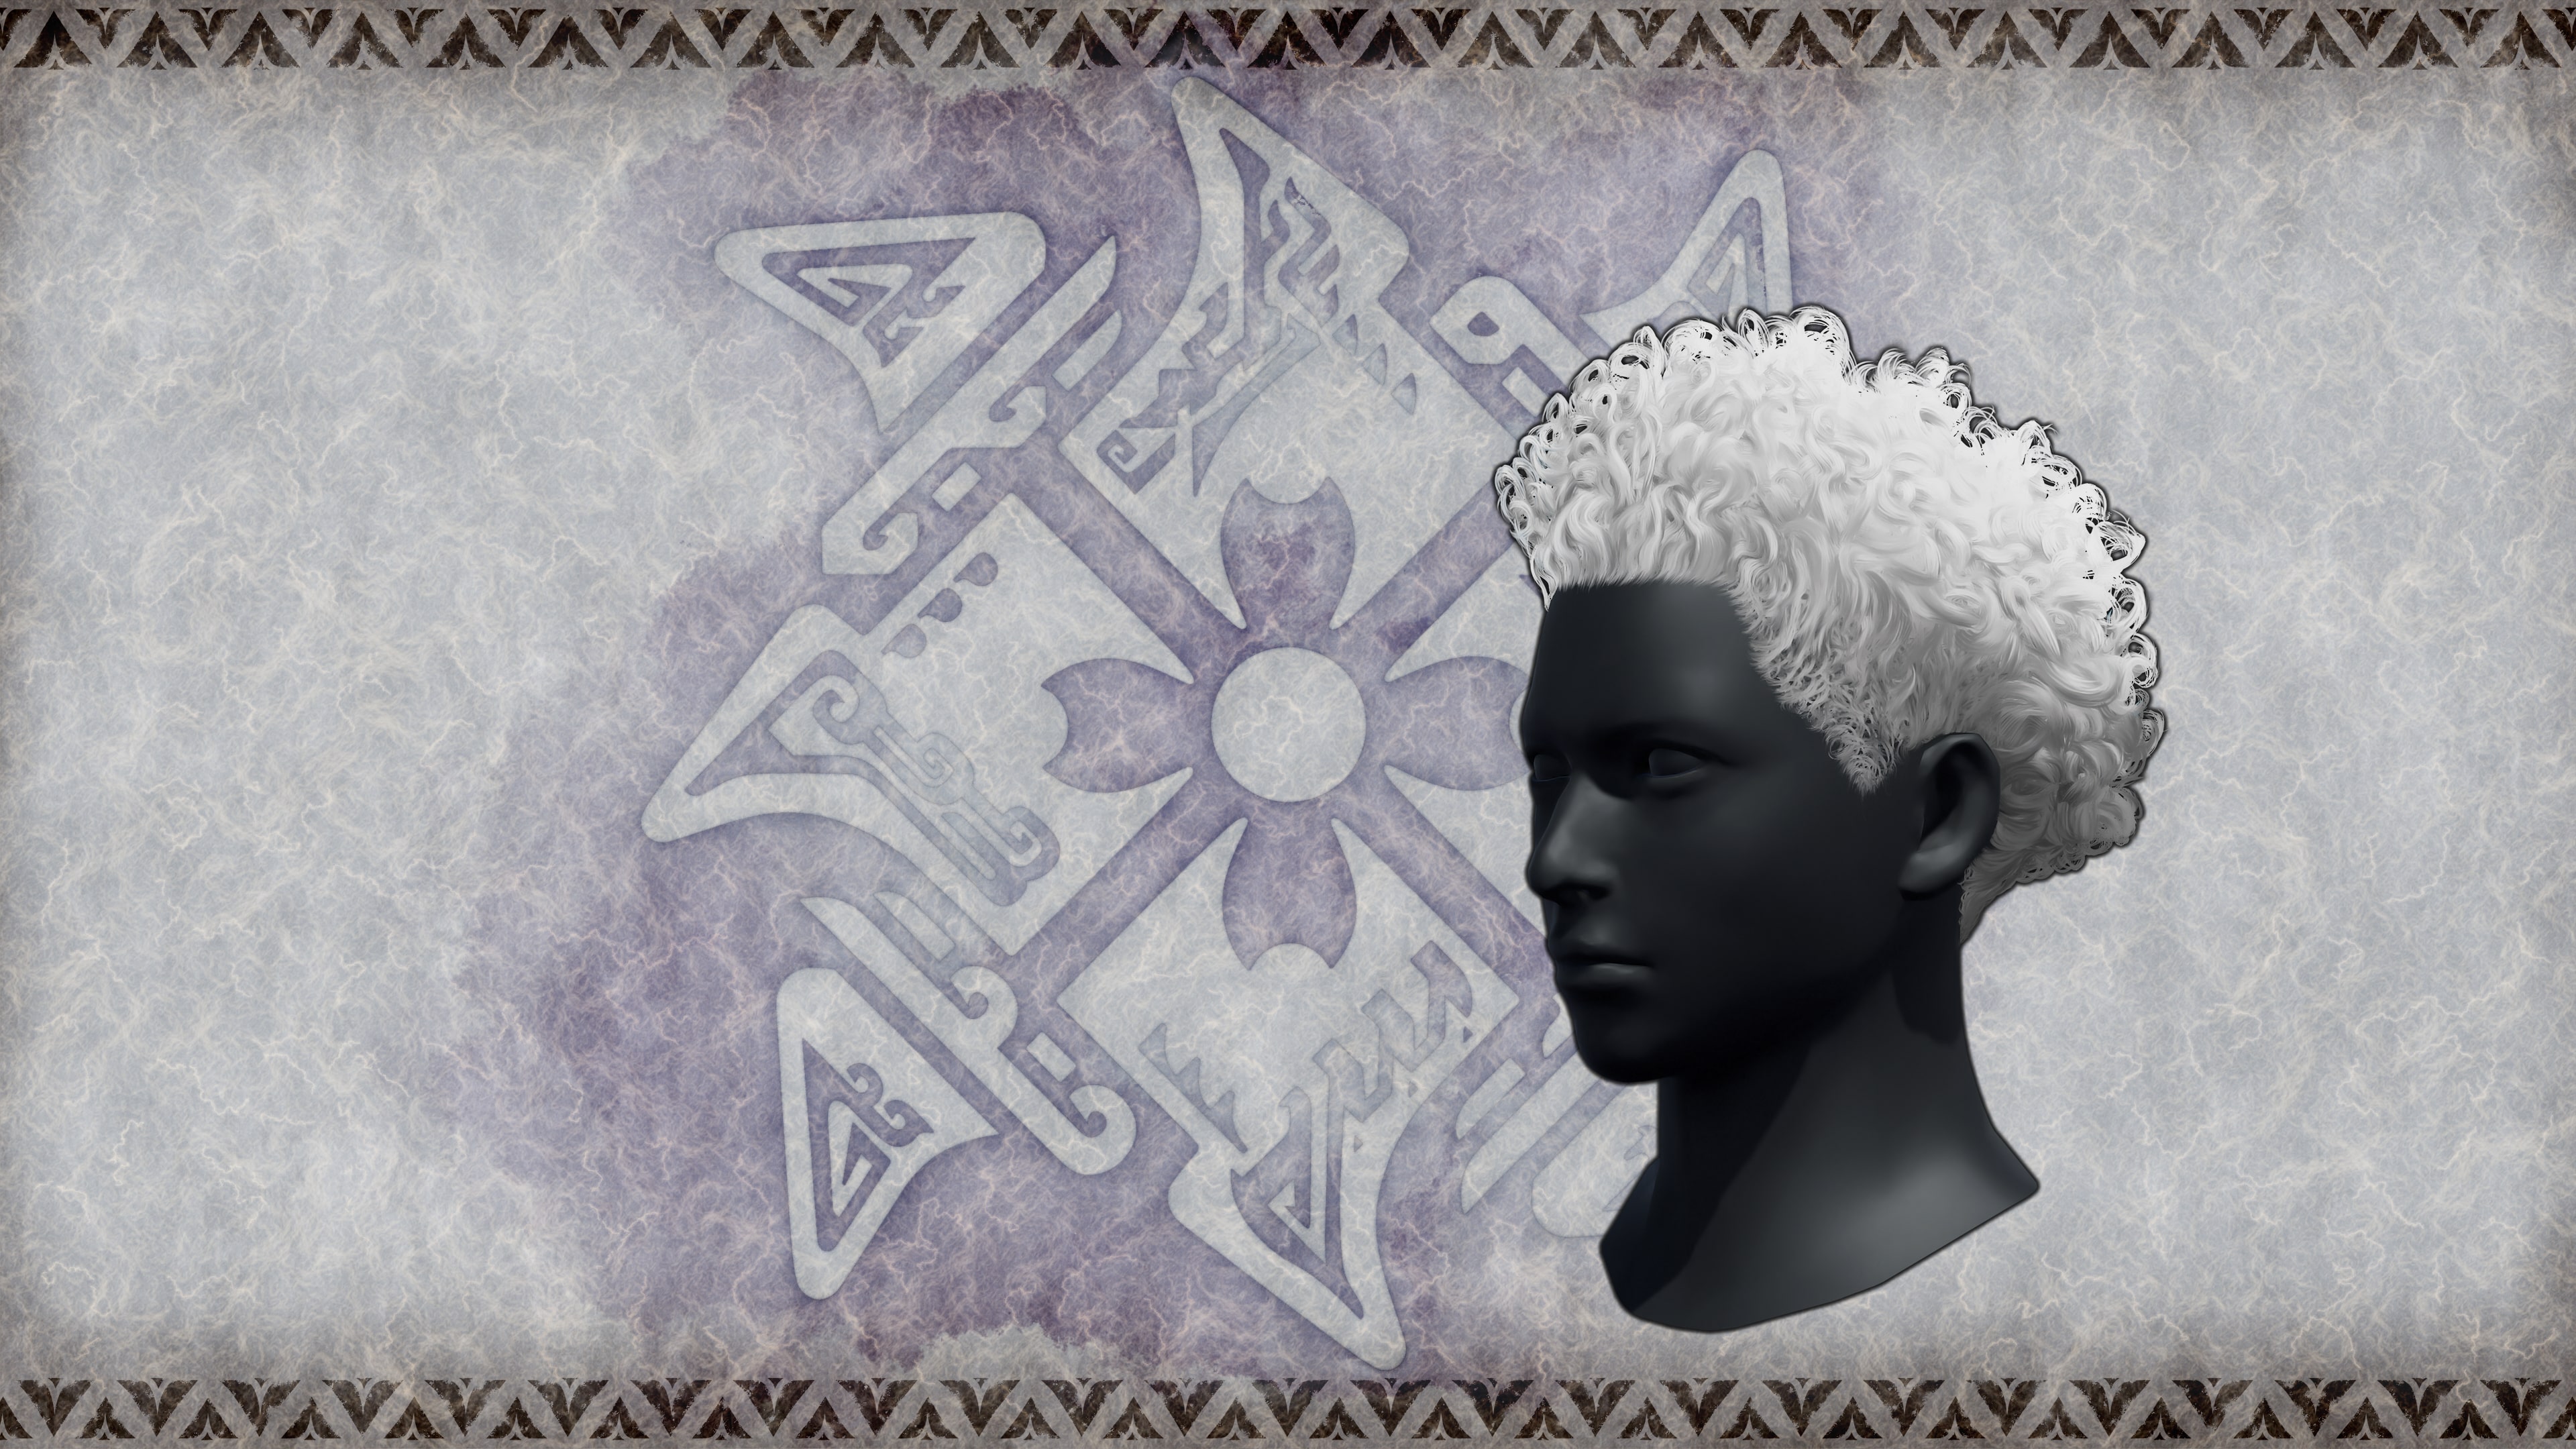 Monster Hunter Rise - "DLC 15" hairstyle